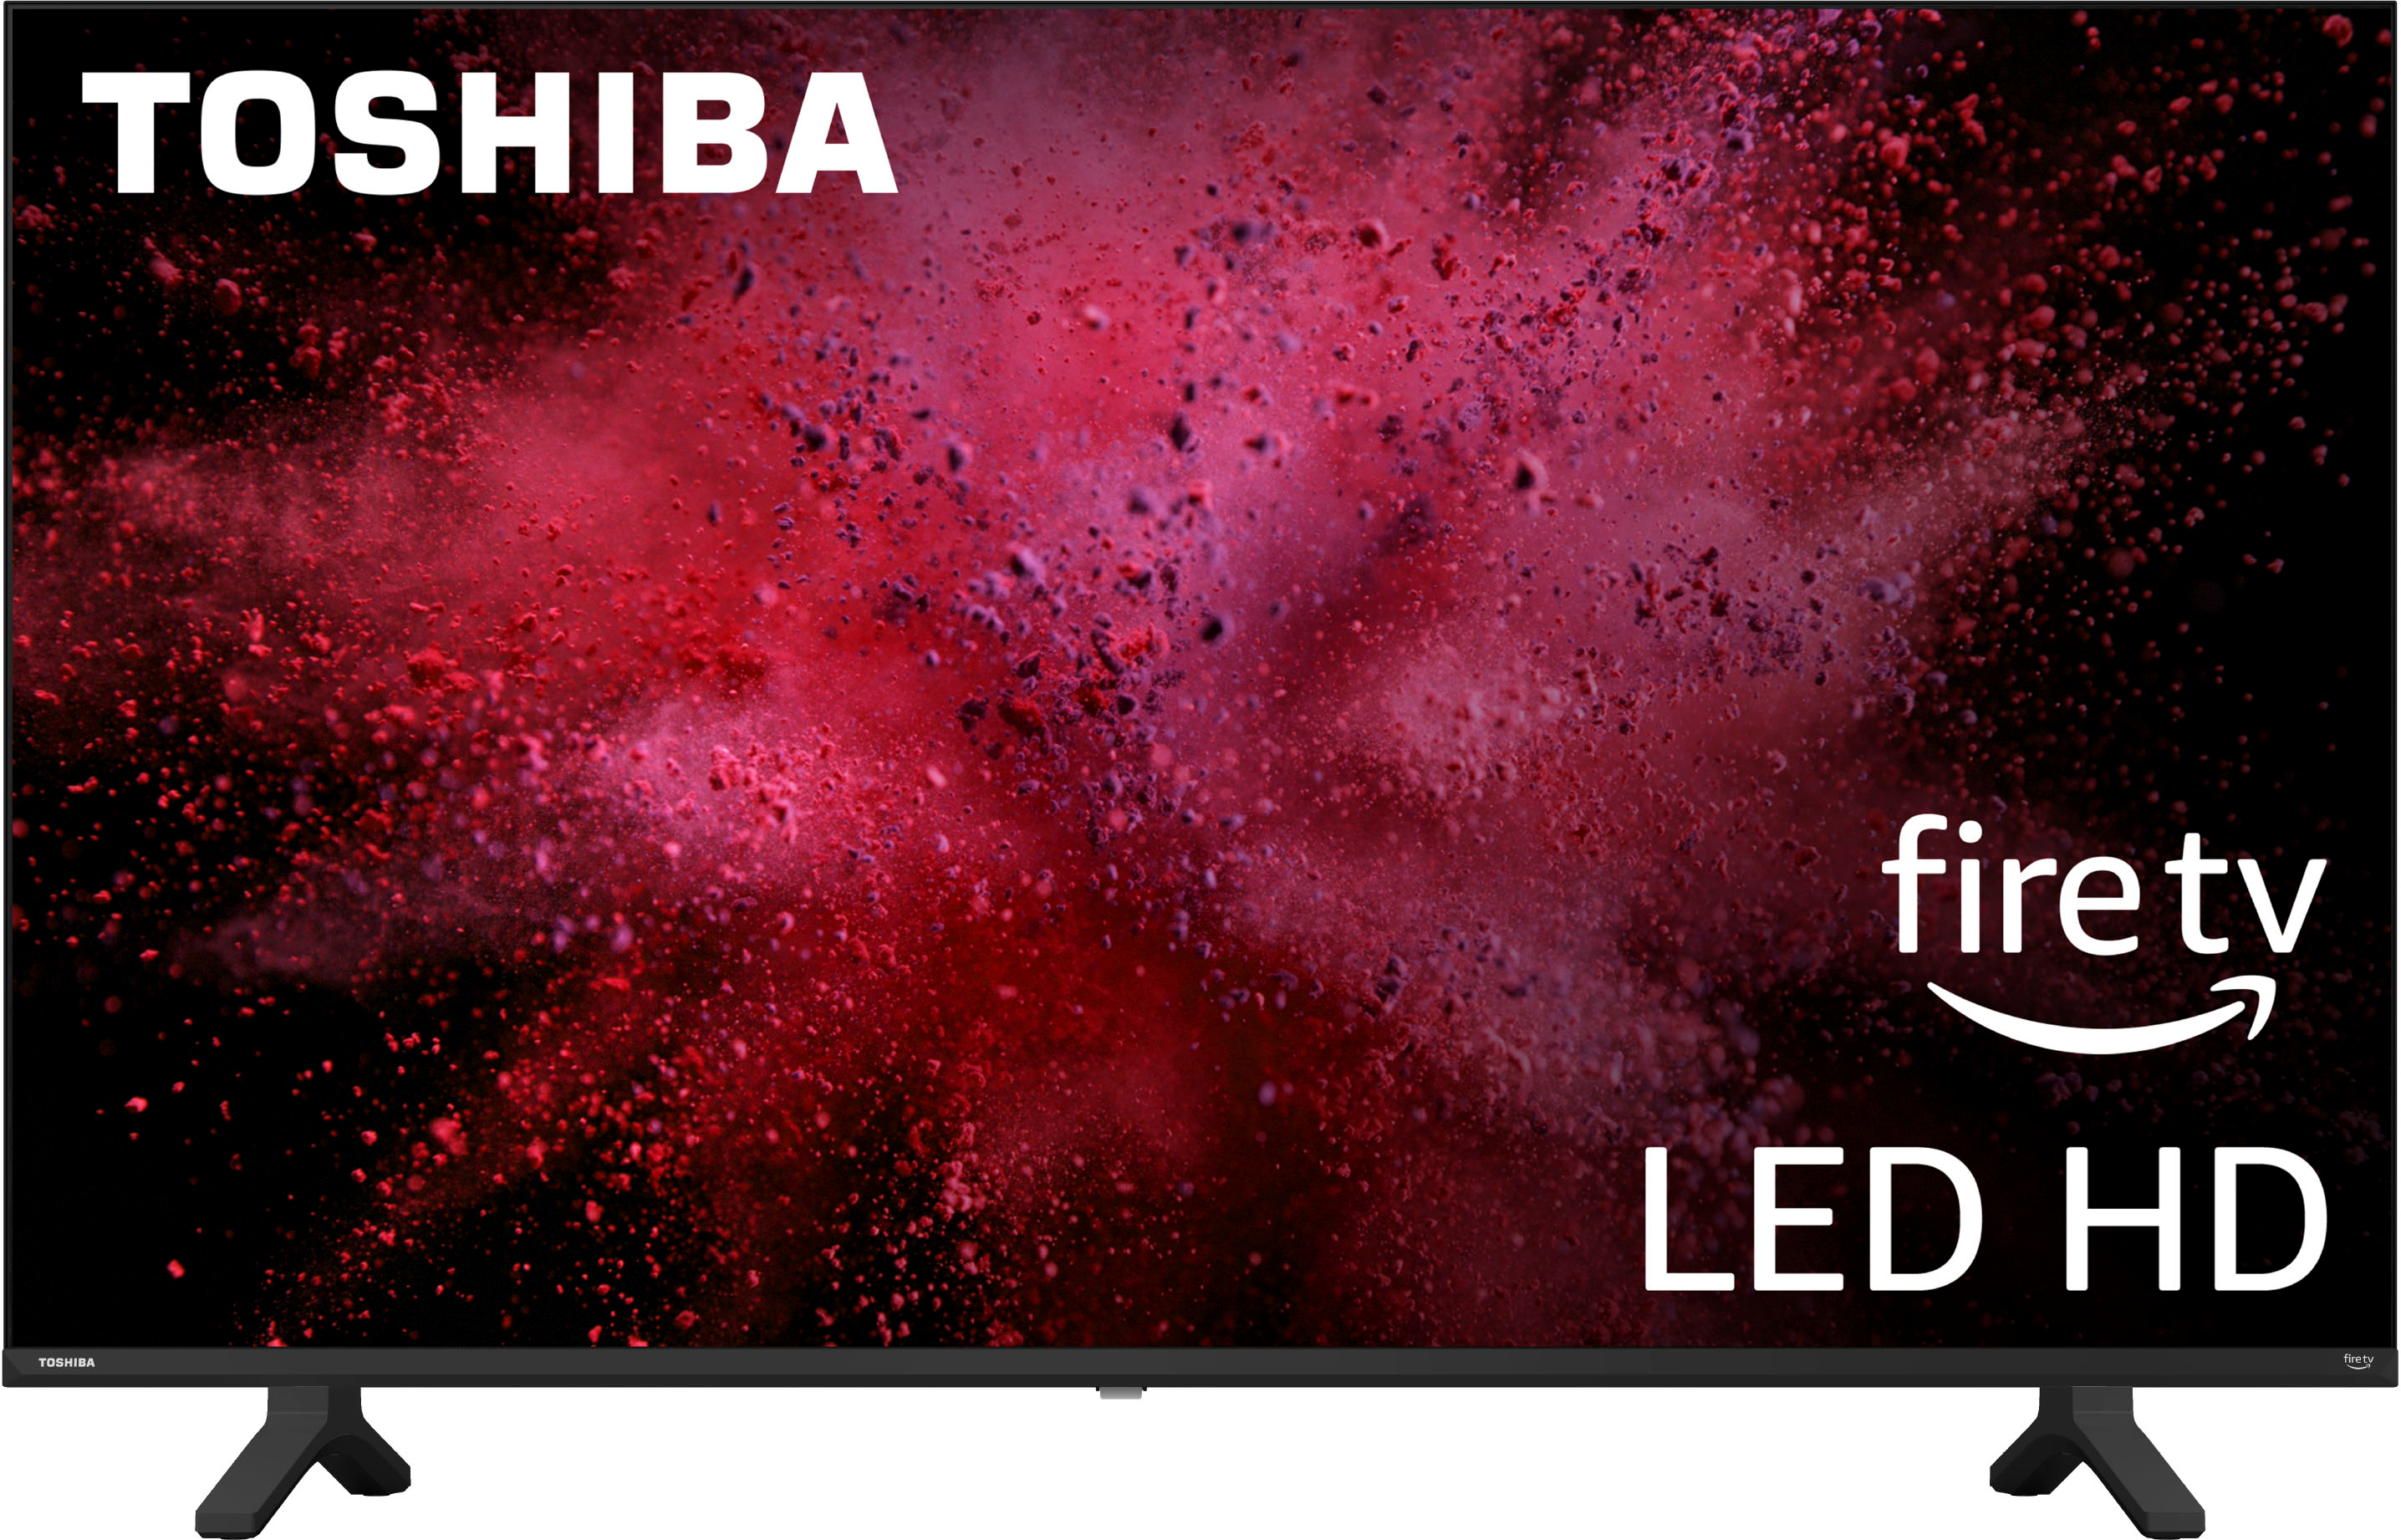 How to Download Apps on Toshiba Smart TV?